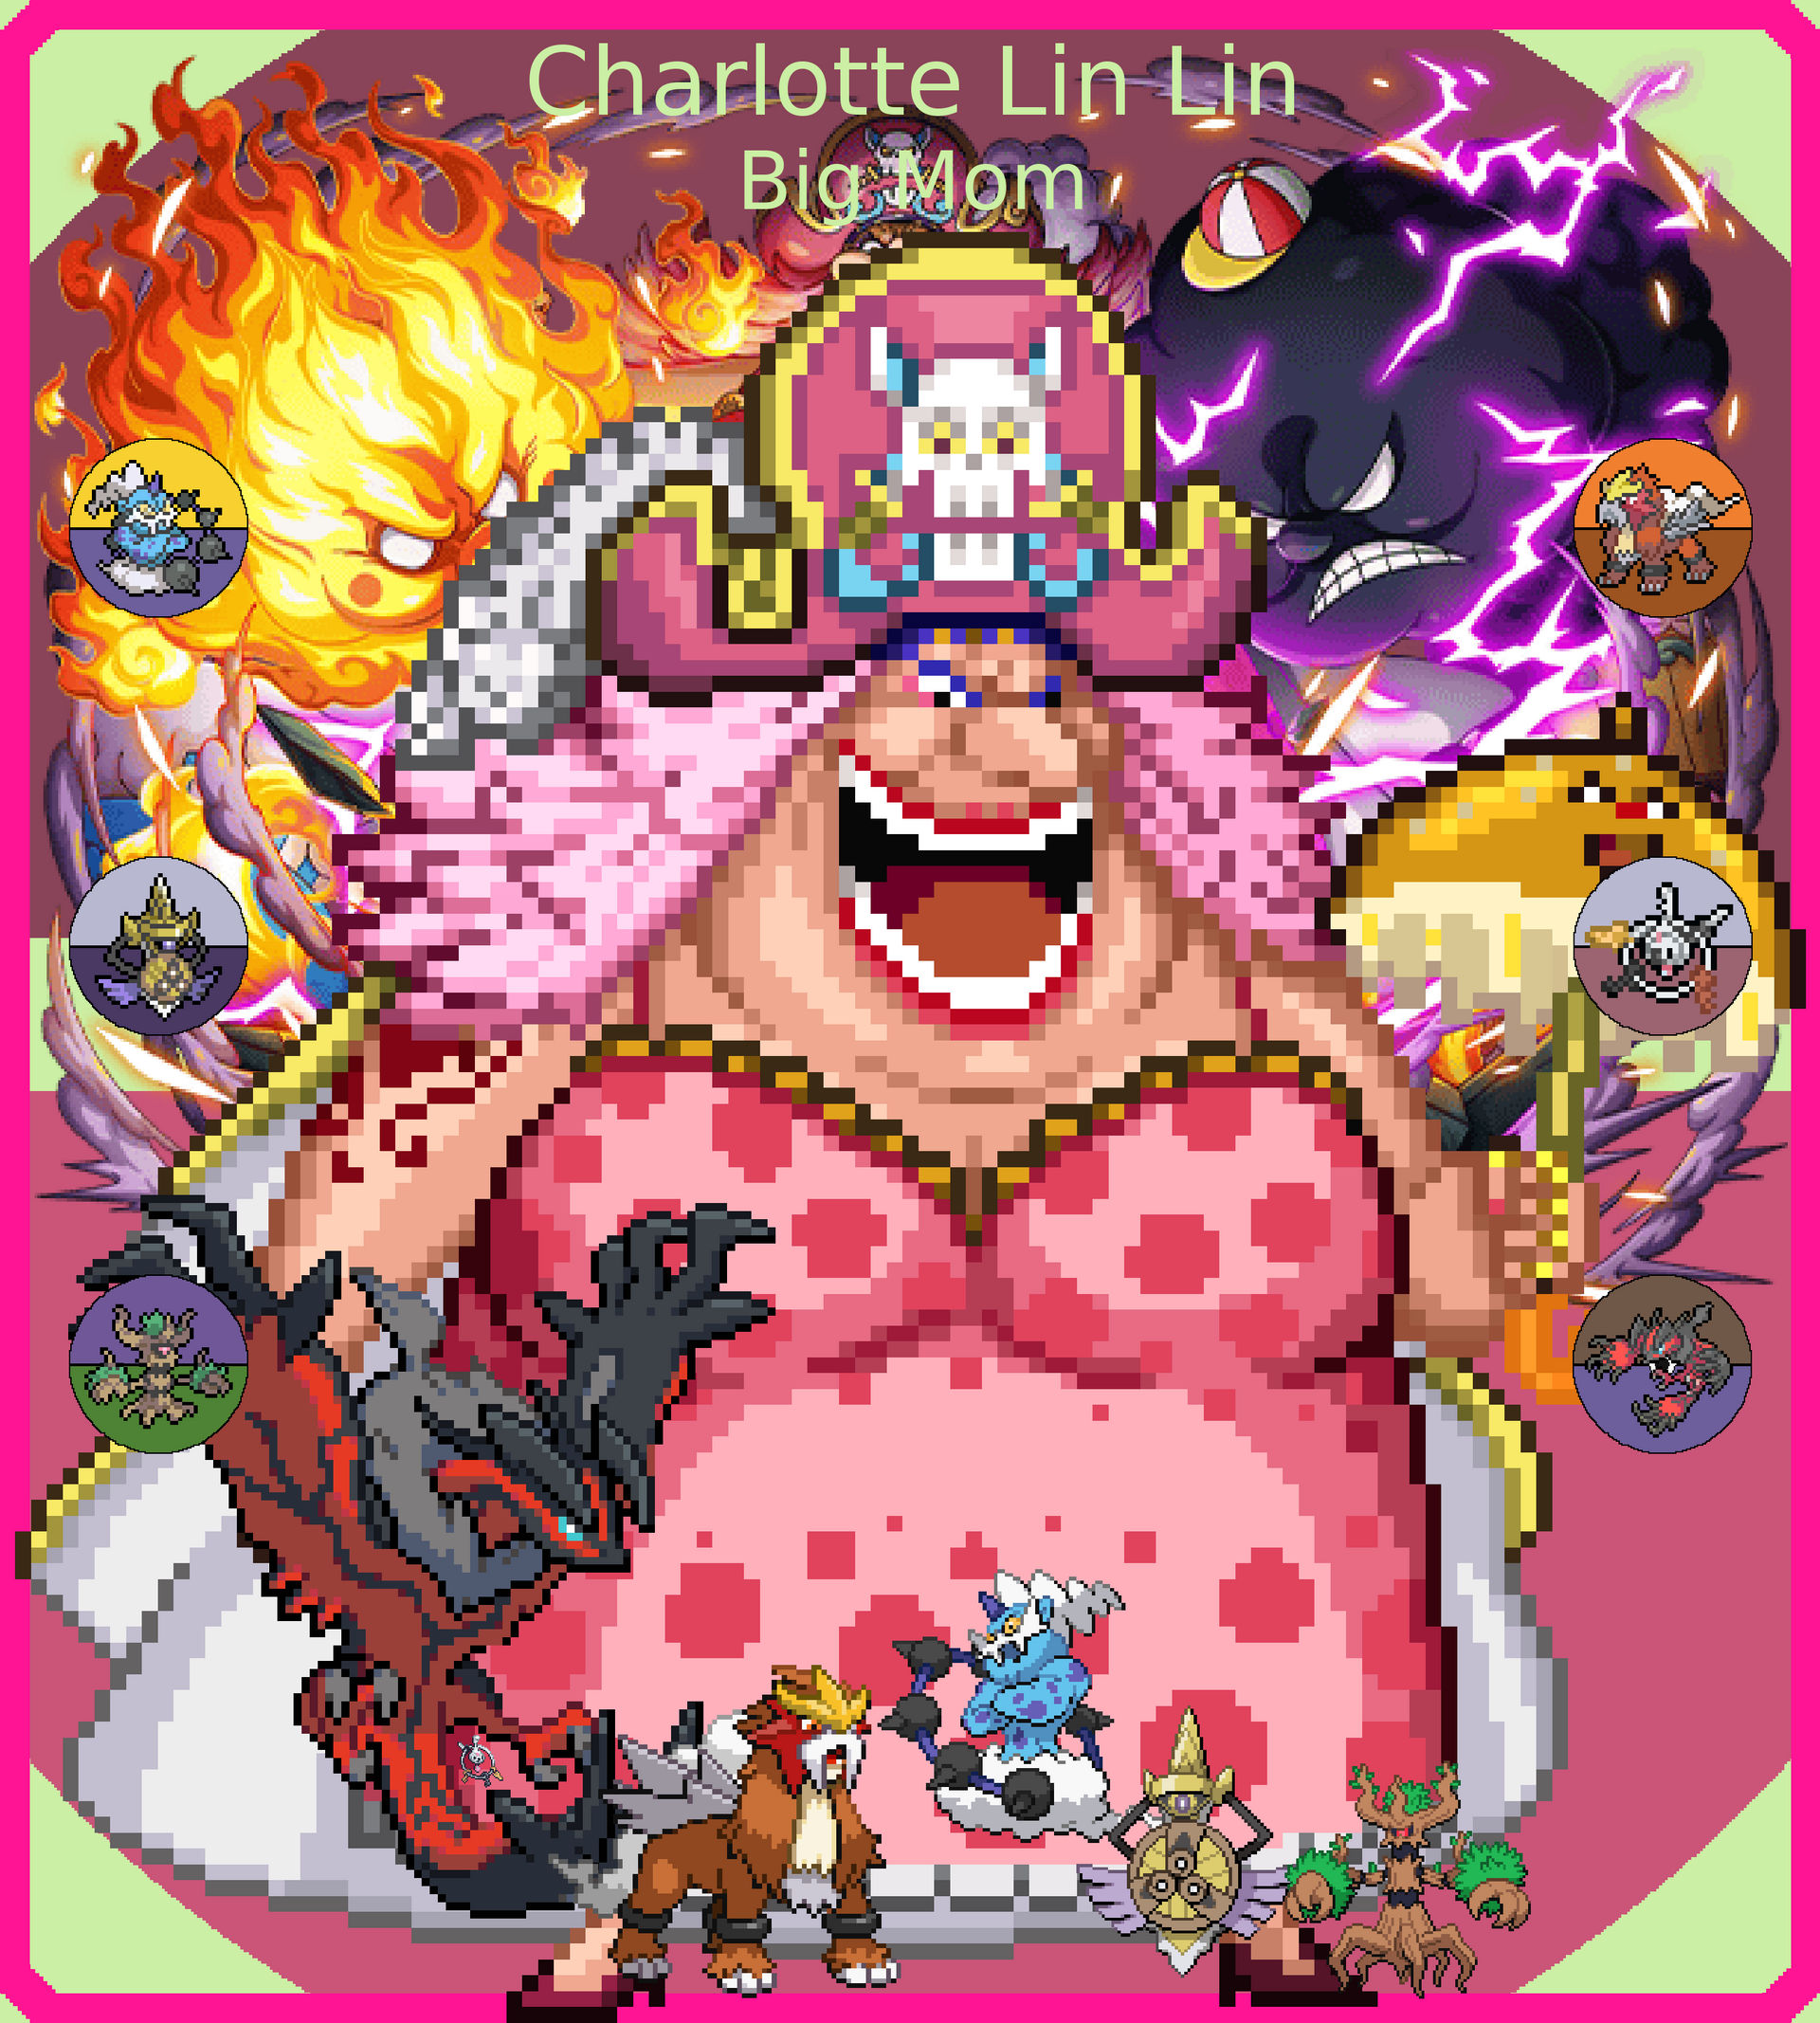 ONE PIECE Treasure Cruise on X: New Character Info! Charlotte